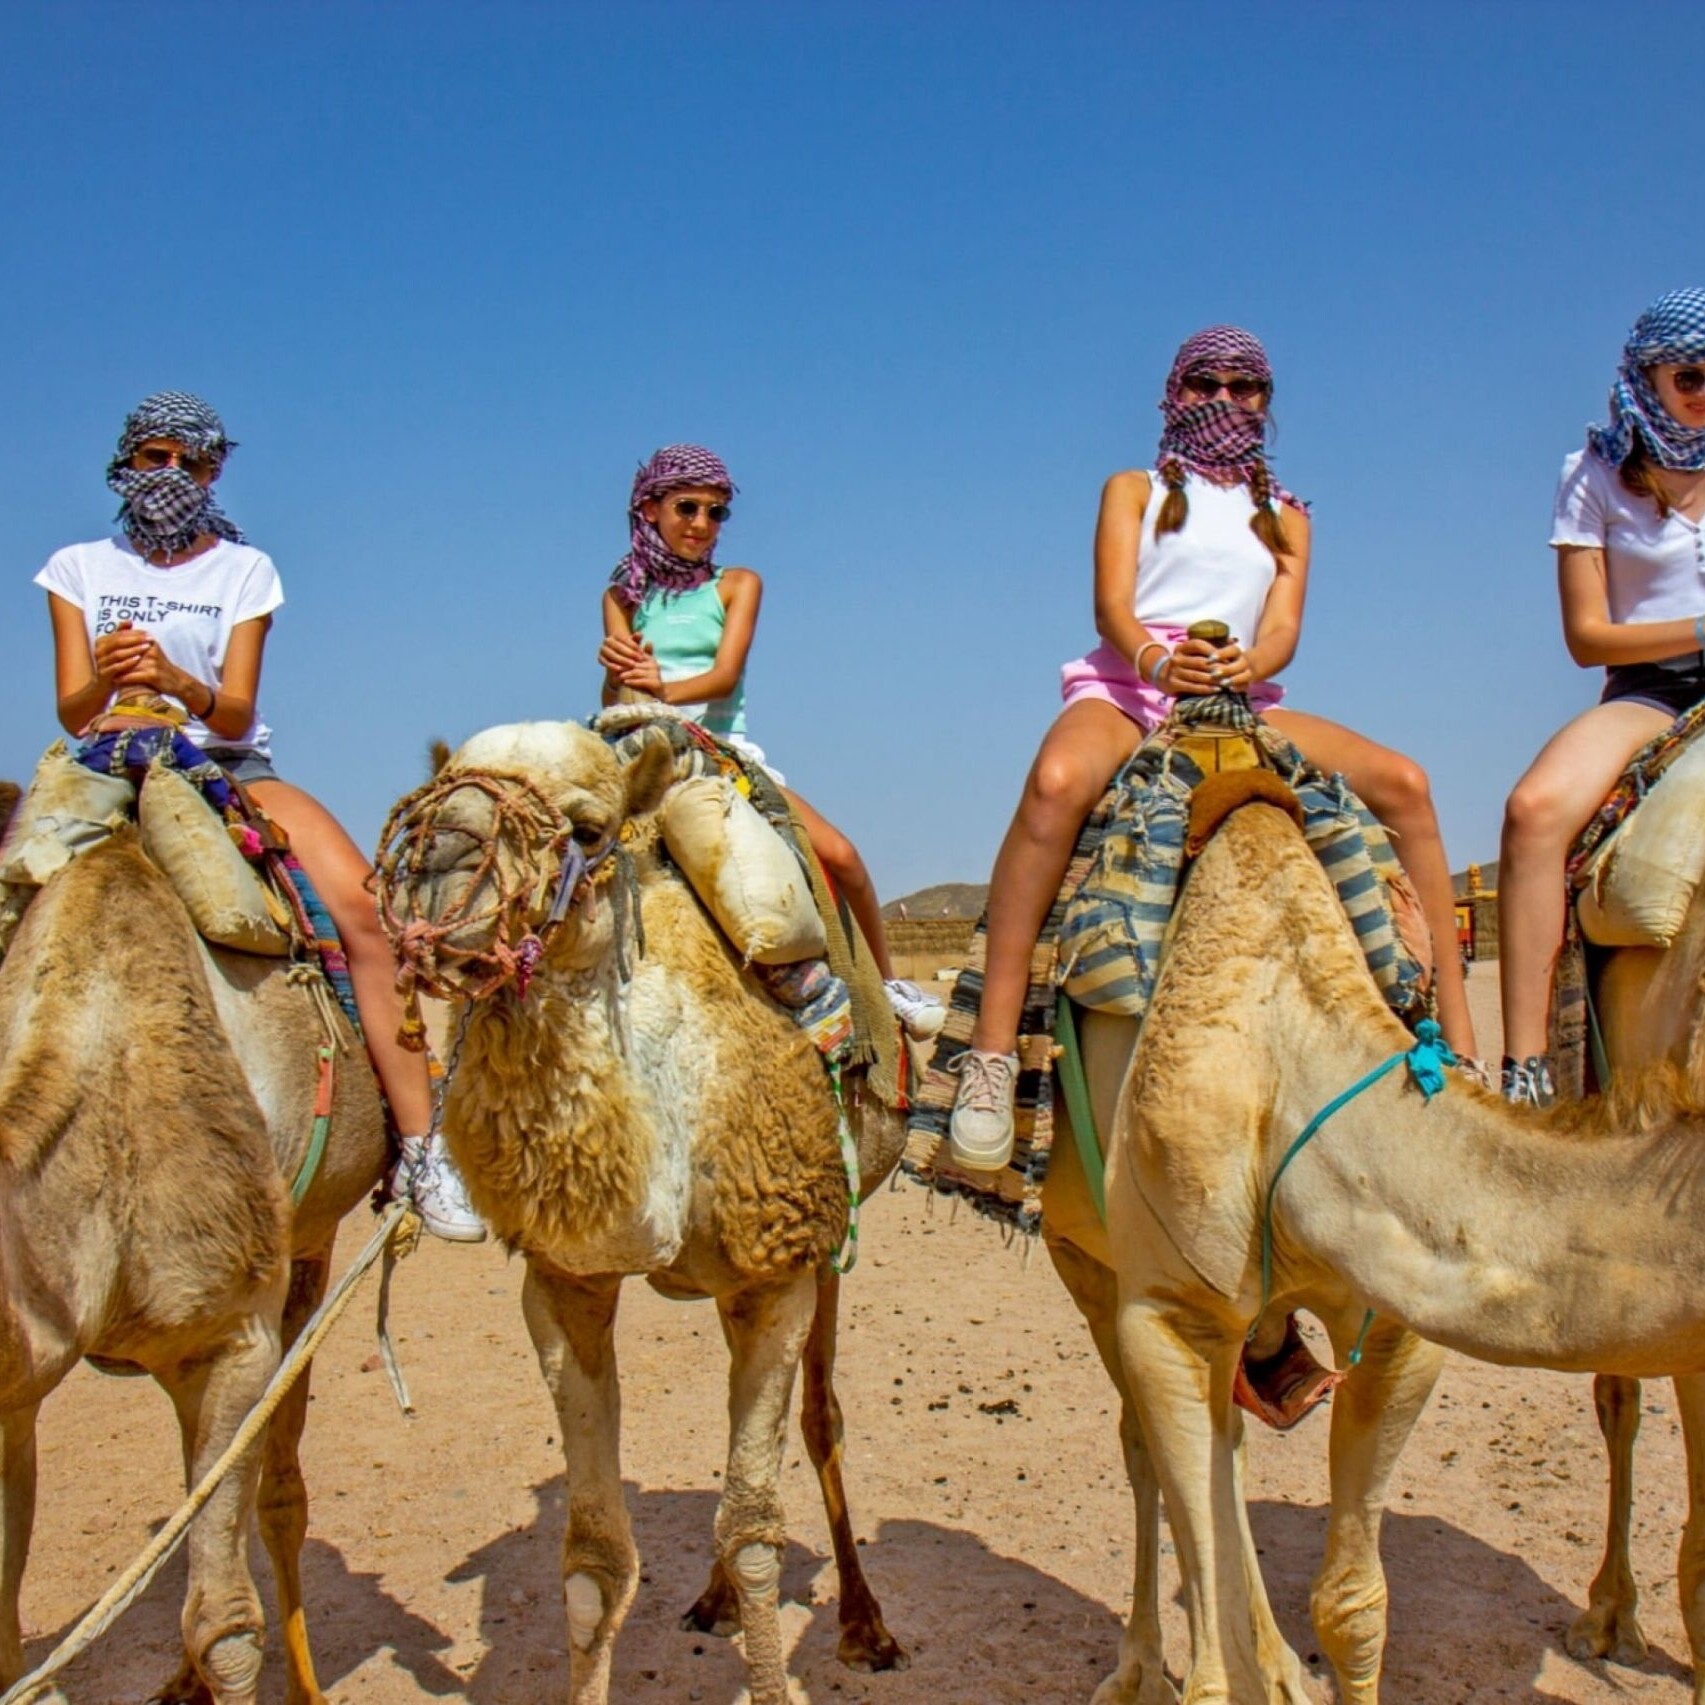 A group of people riding on the backs of camel.